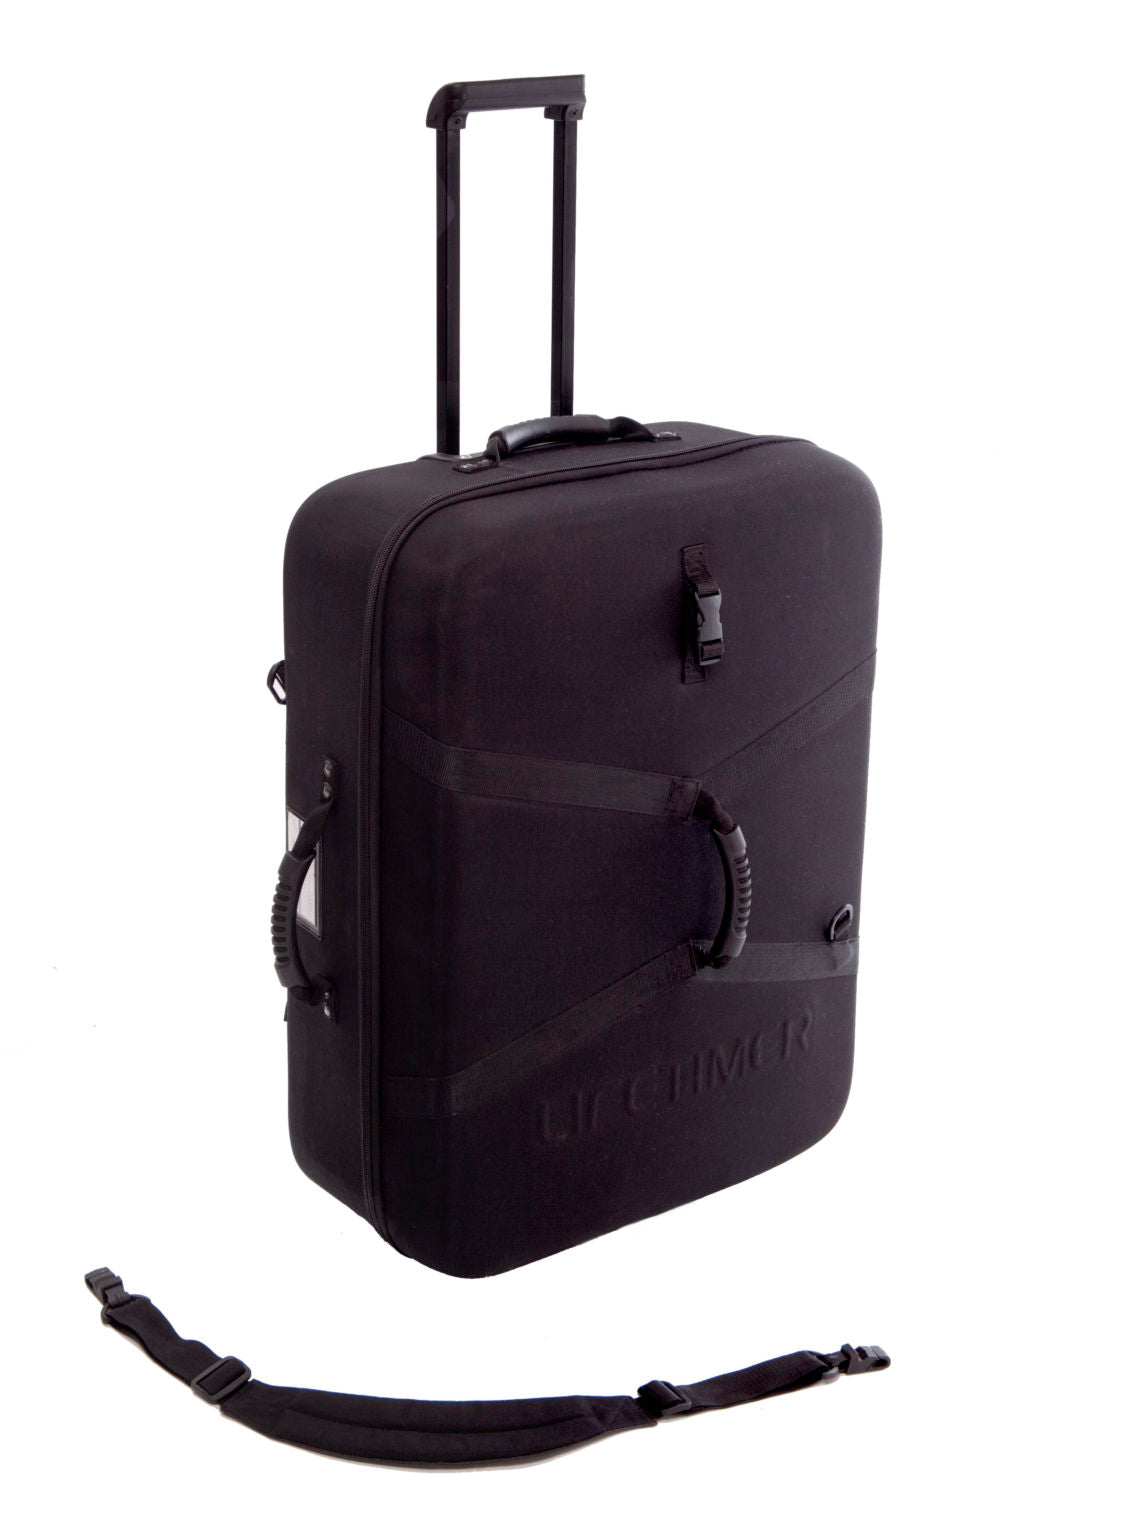 Black Lifetimer International Travel-Lite portable travel luggage case with spinner wheels for portable therapy tables